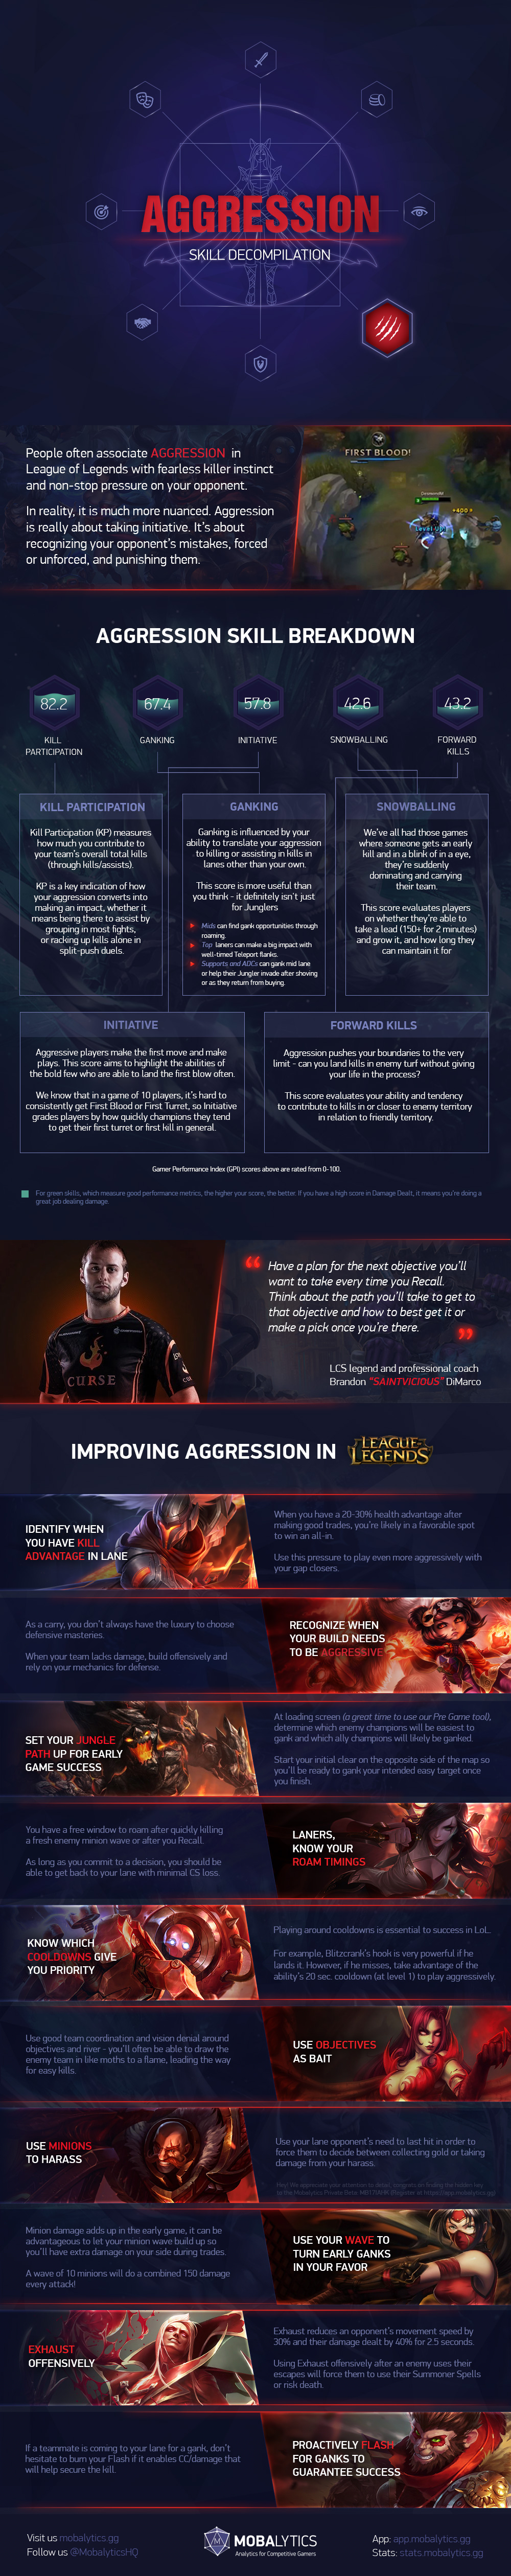 Aggression 2018 Infographic